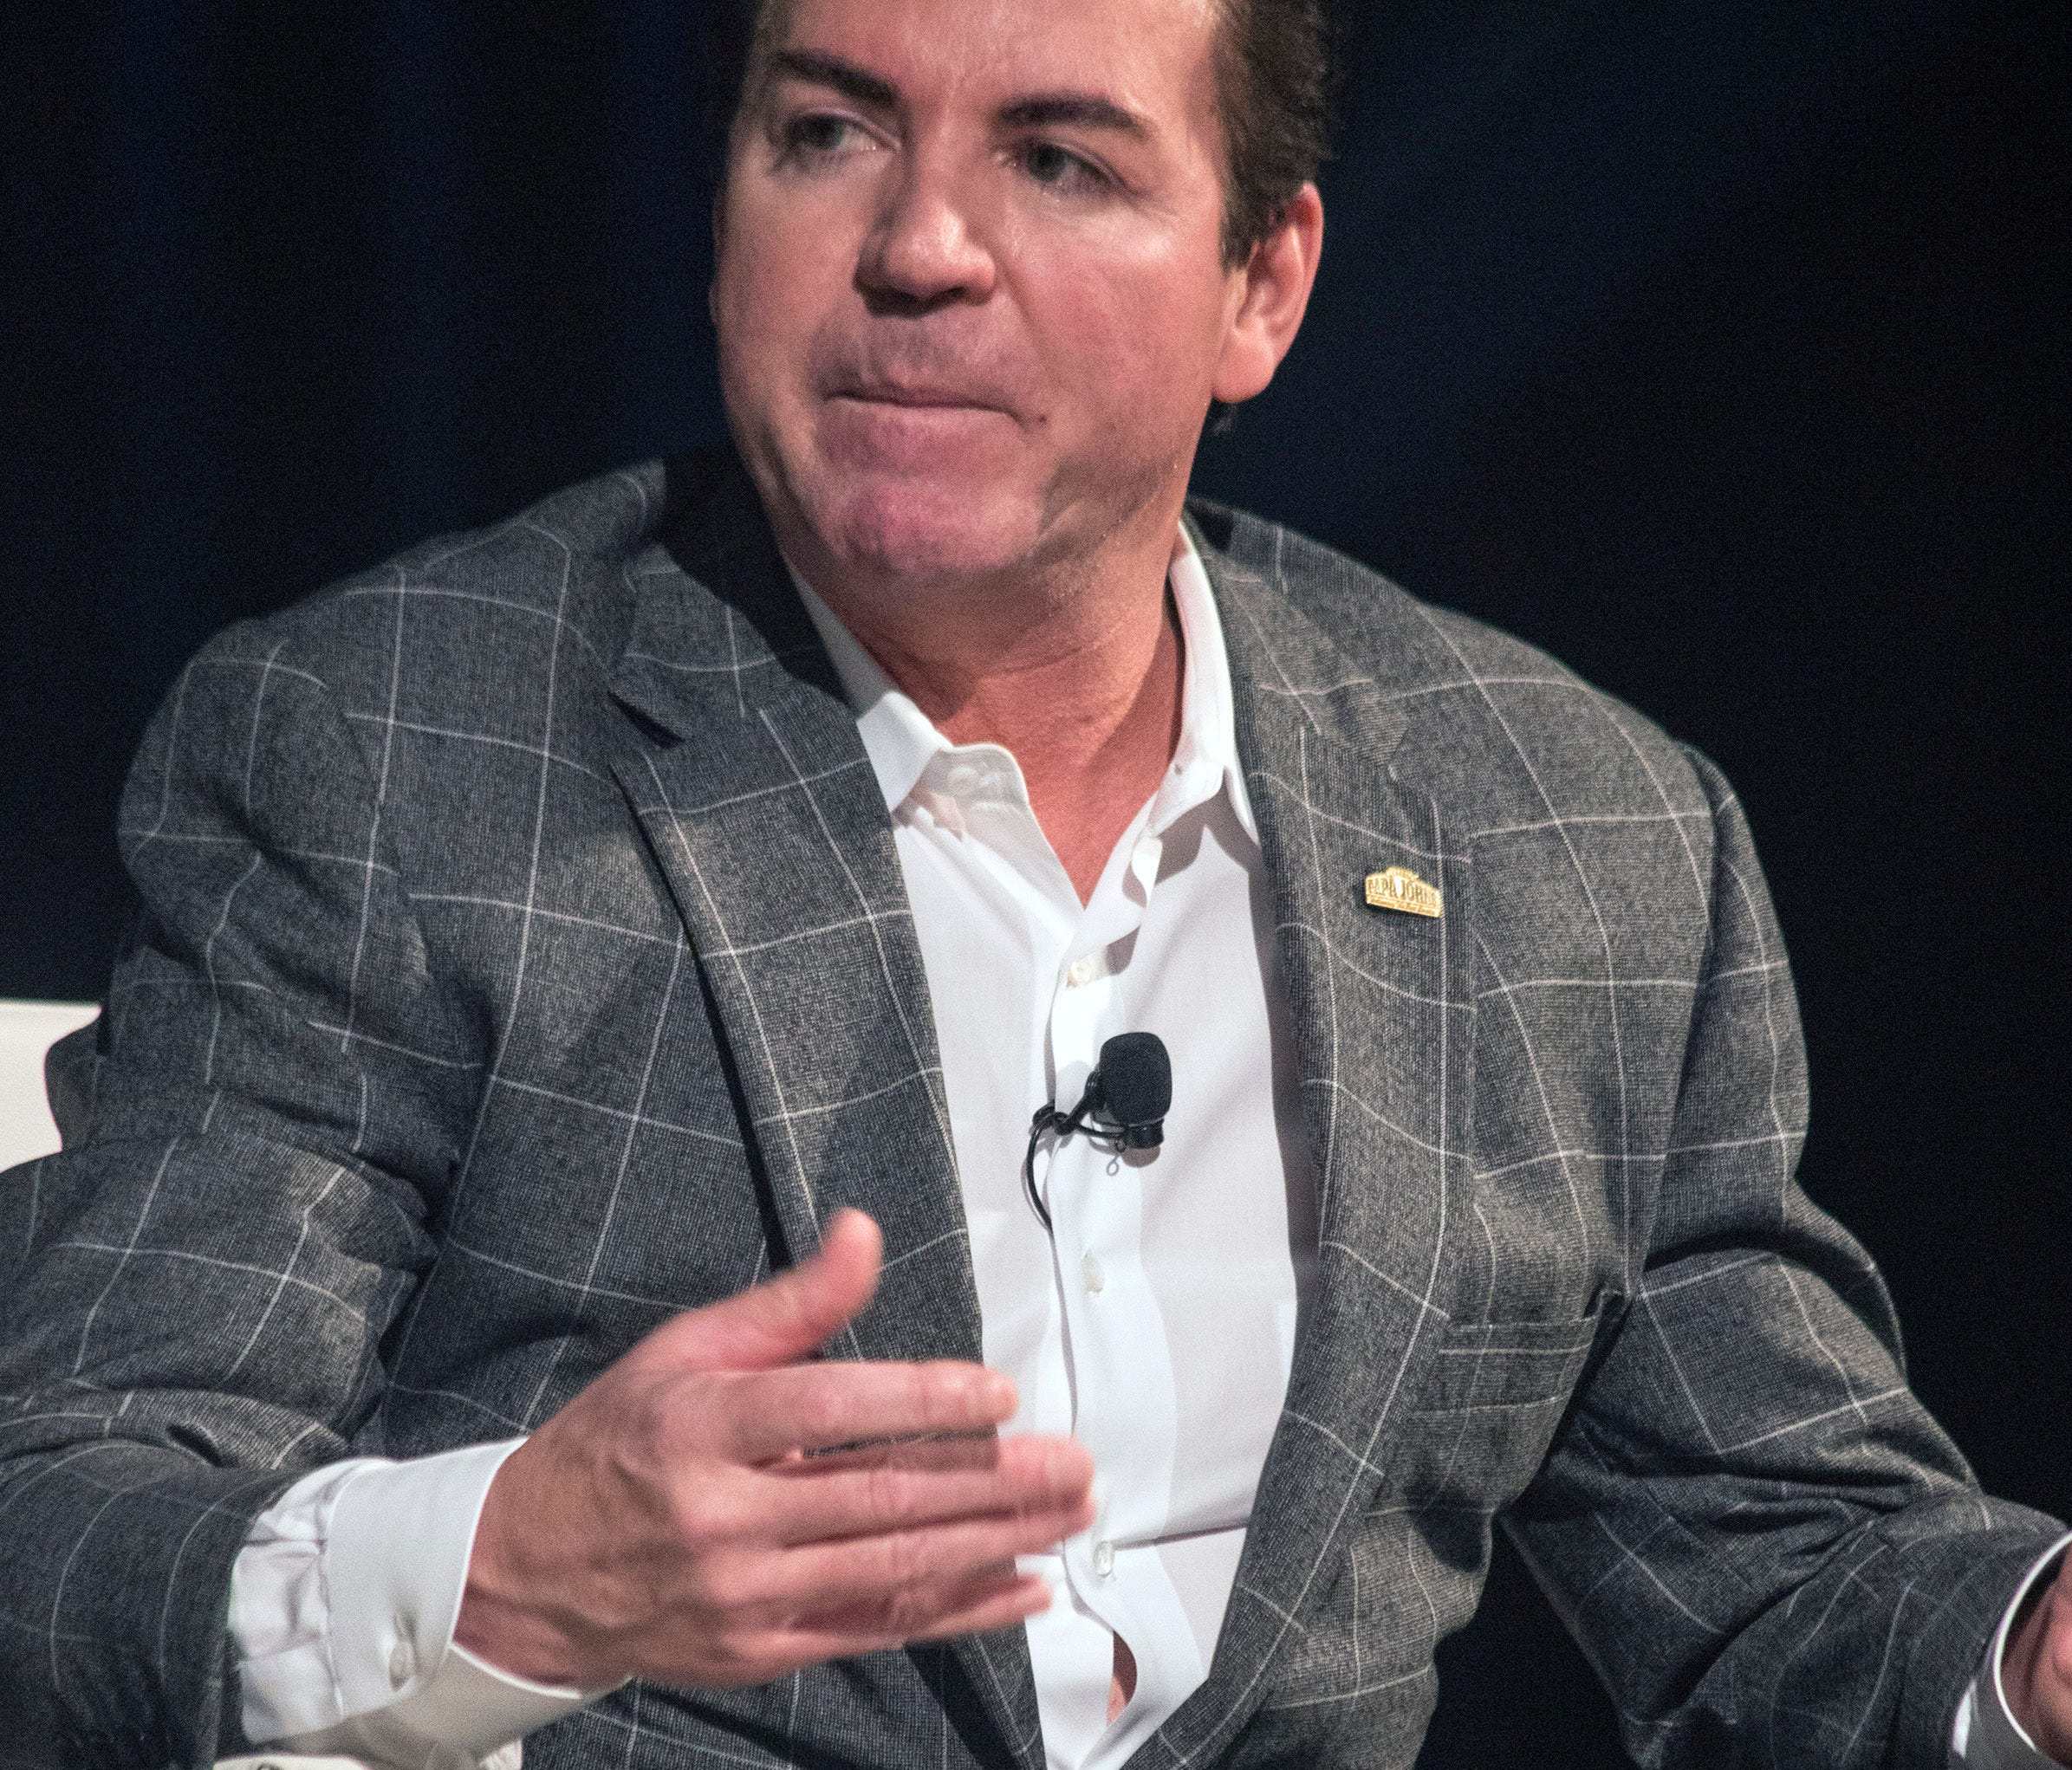 Papa John's founder John Schnatter was the featured speaker at a GLI hosted event at the Palace Theatre on Wednesday night. 1/25/17